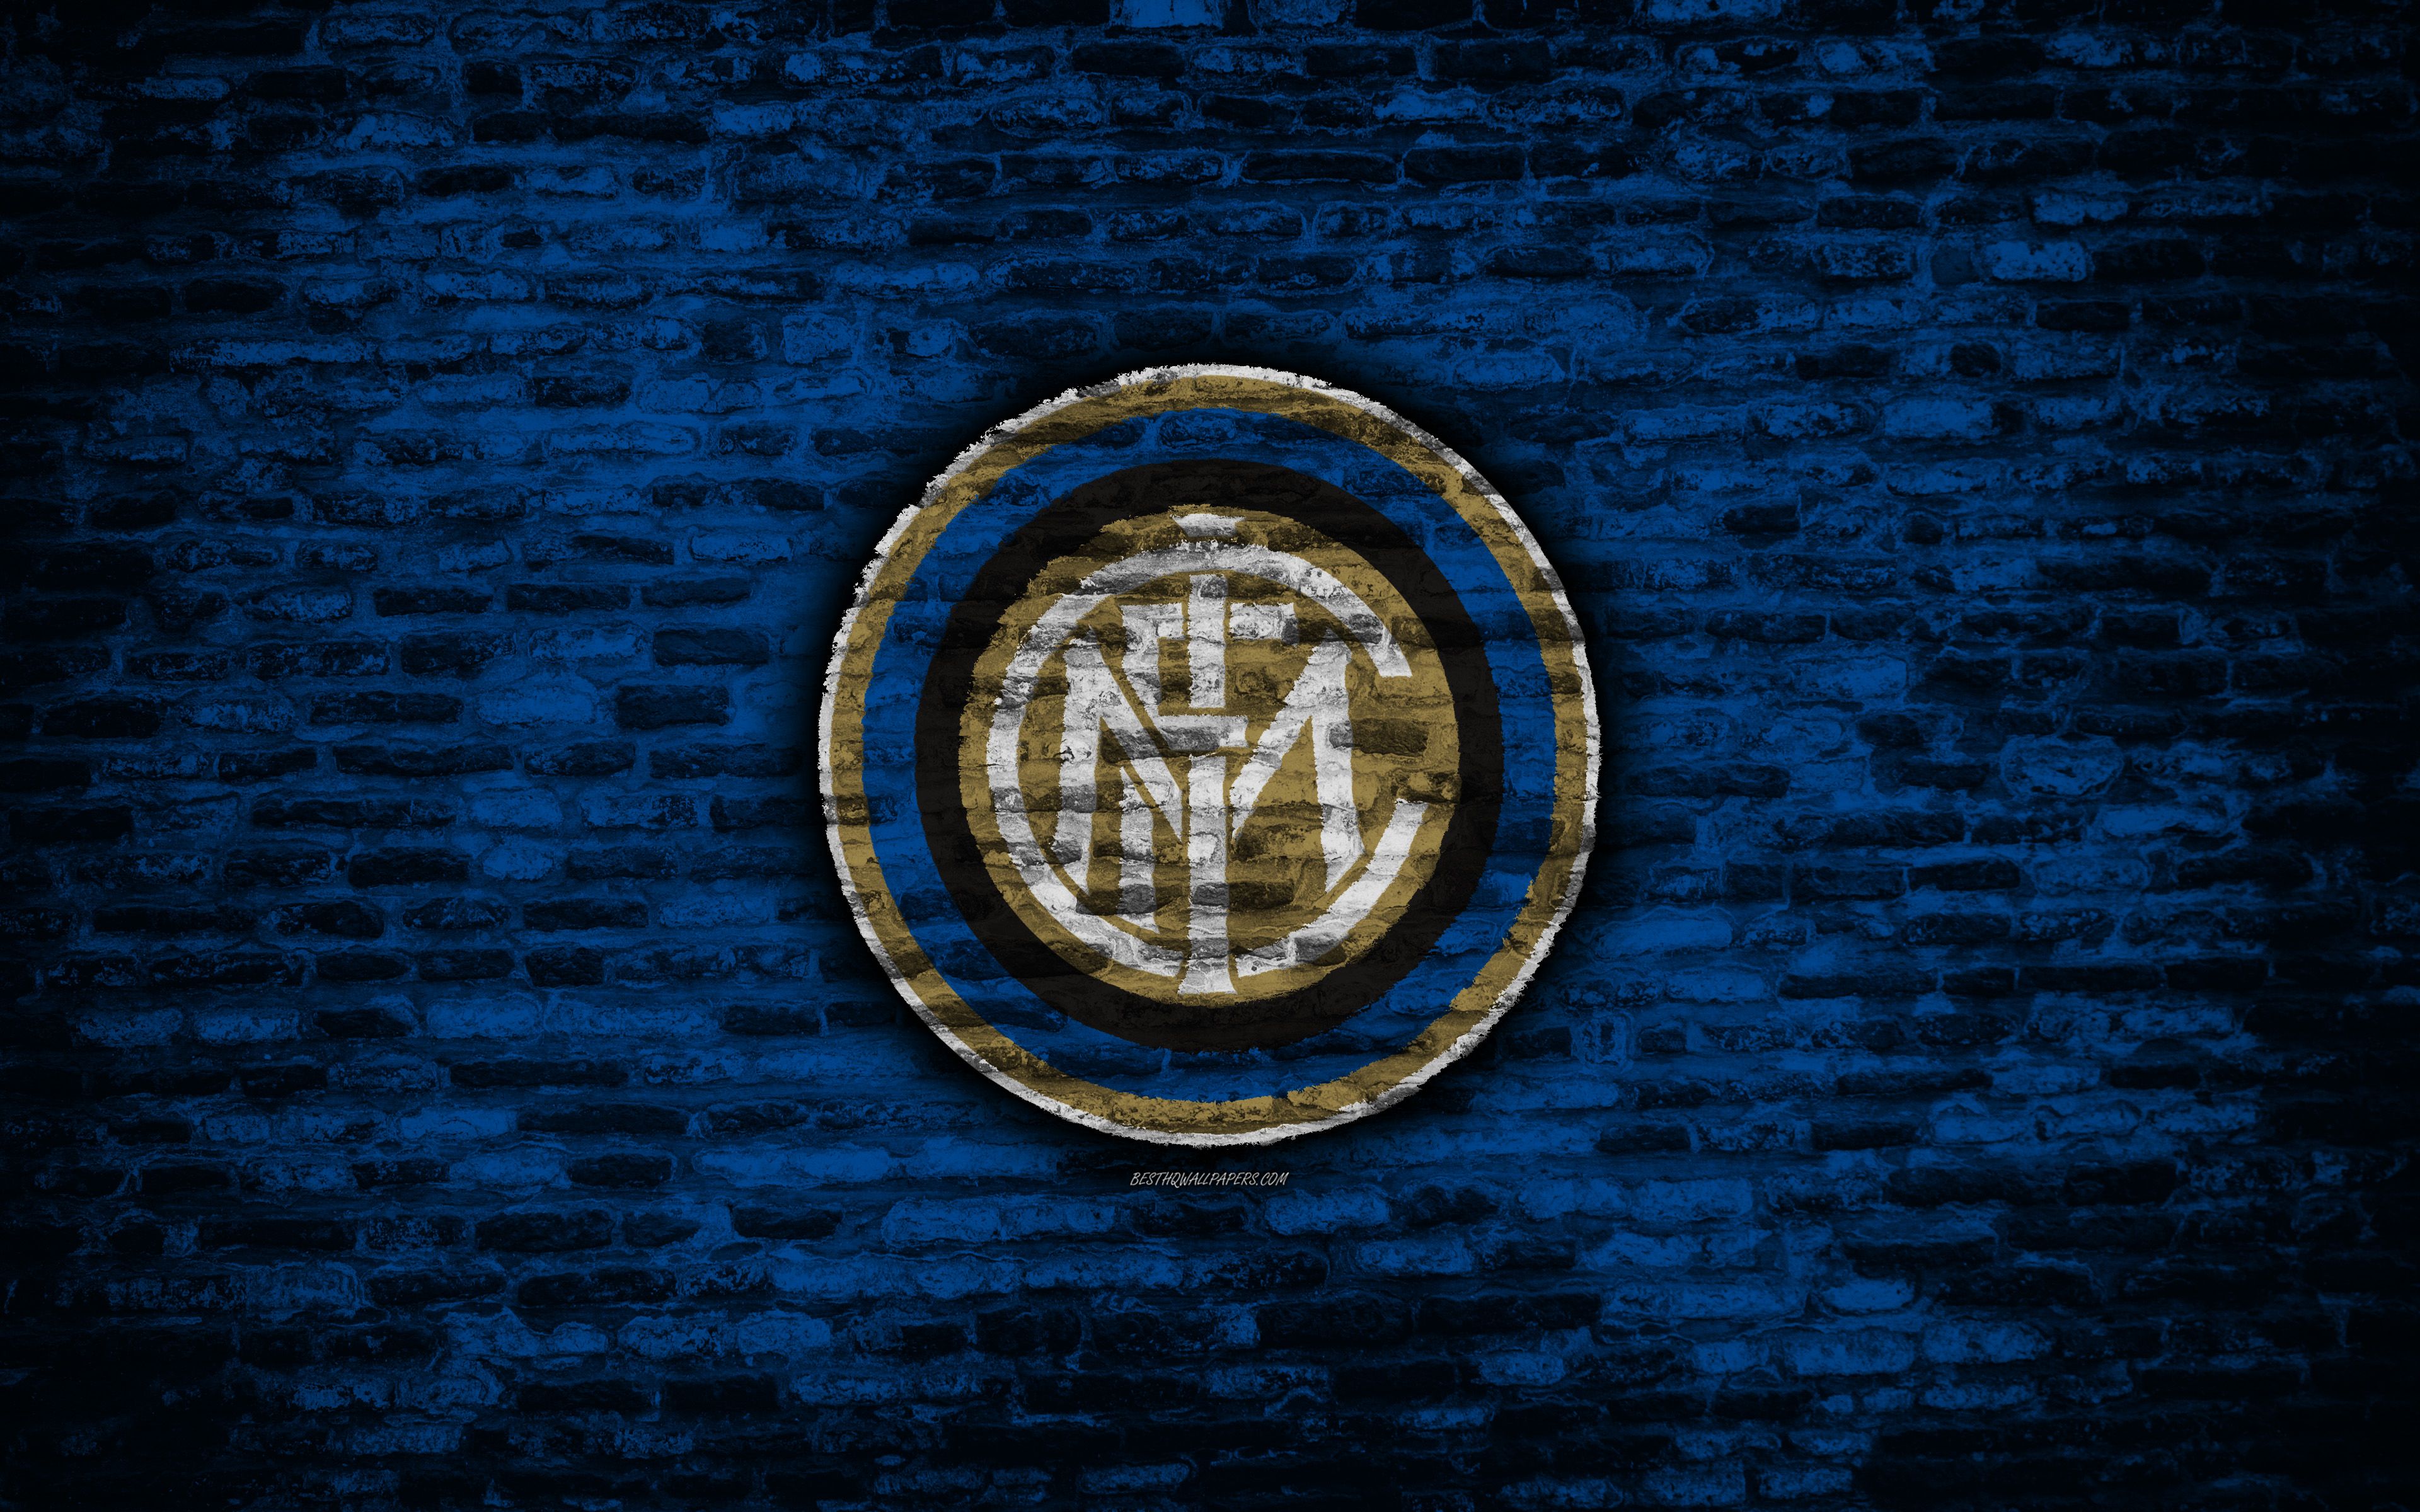 Download wallpaper Inter Milan FC, 4k, logo, brick wall, Serie A, football, Italian football club, soccer, Internazionale, brick texture, Milan, Italy for desktop with resolution 3840x2400. High Quality HD picture wallpaper